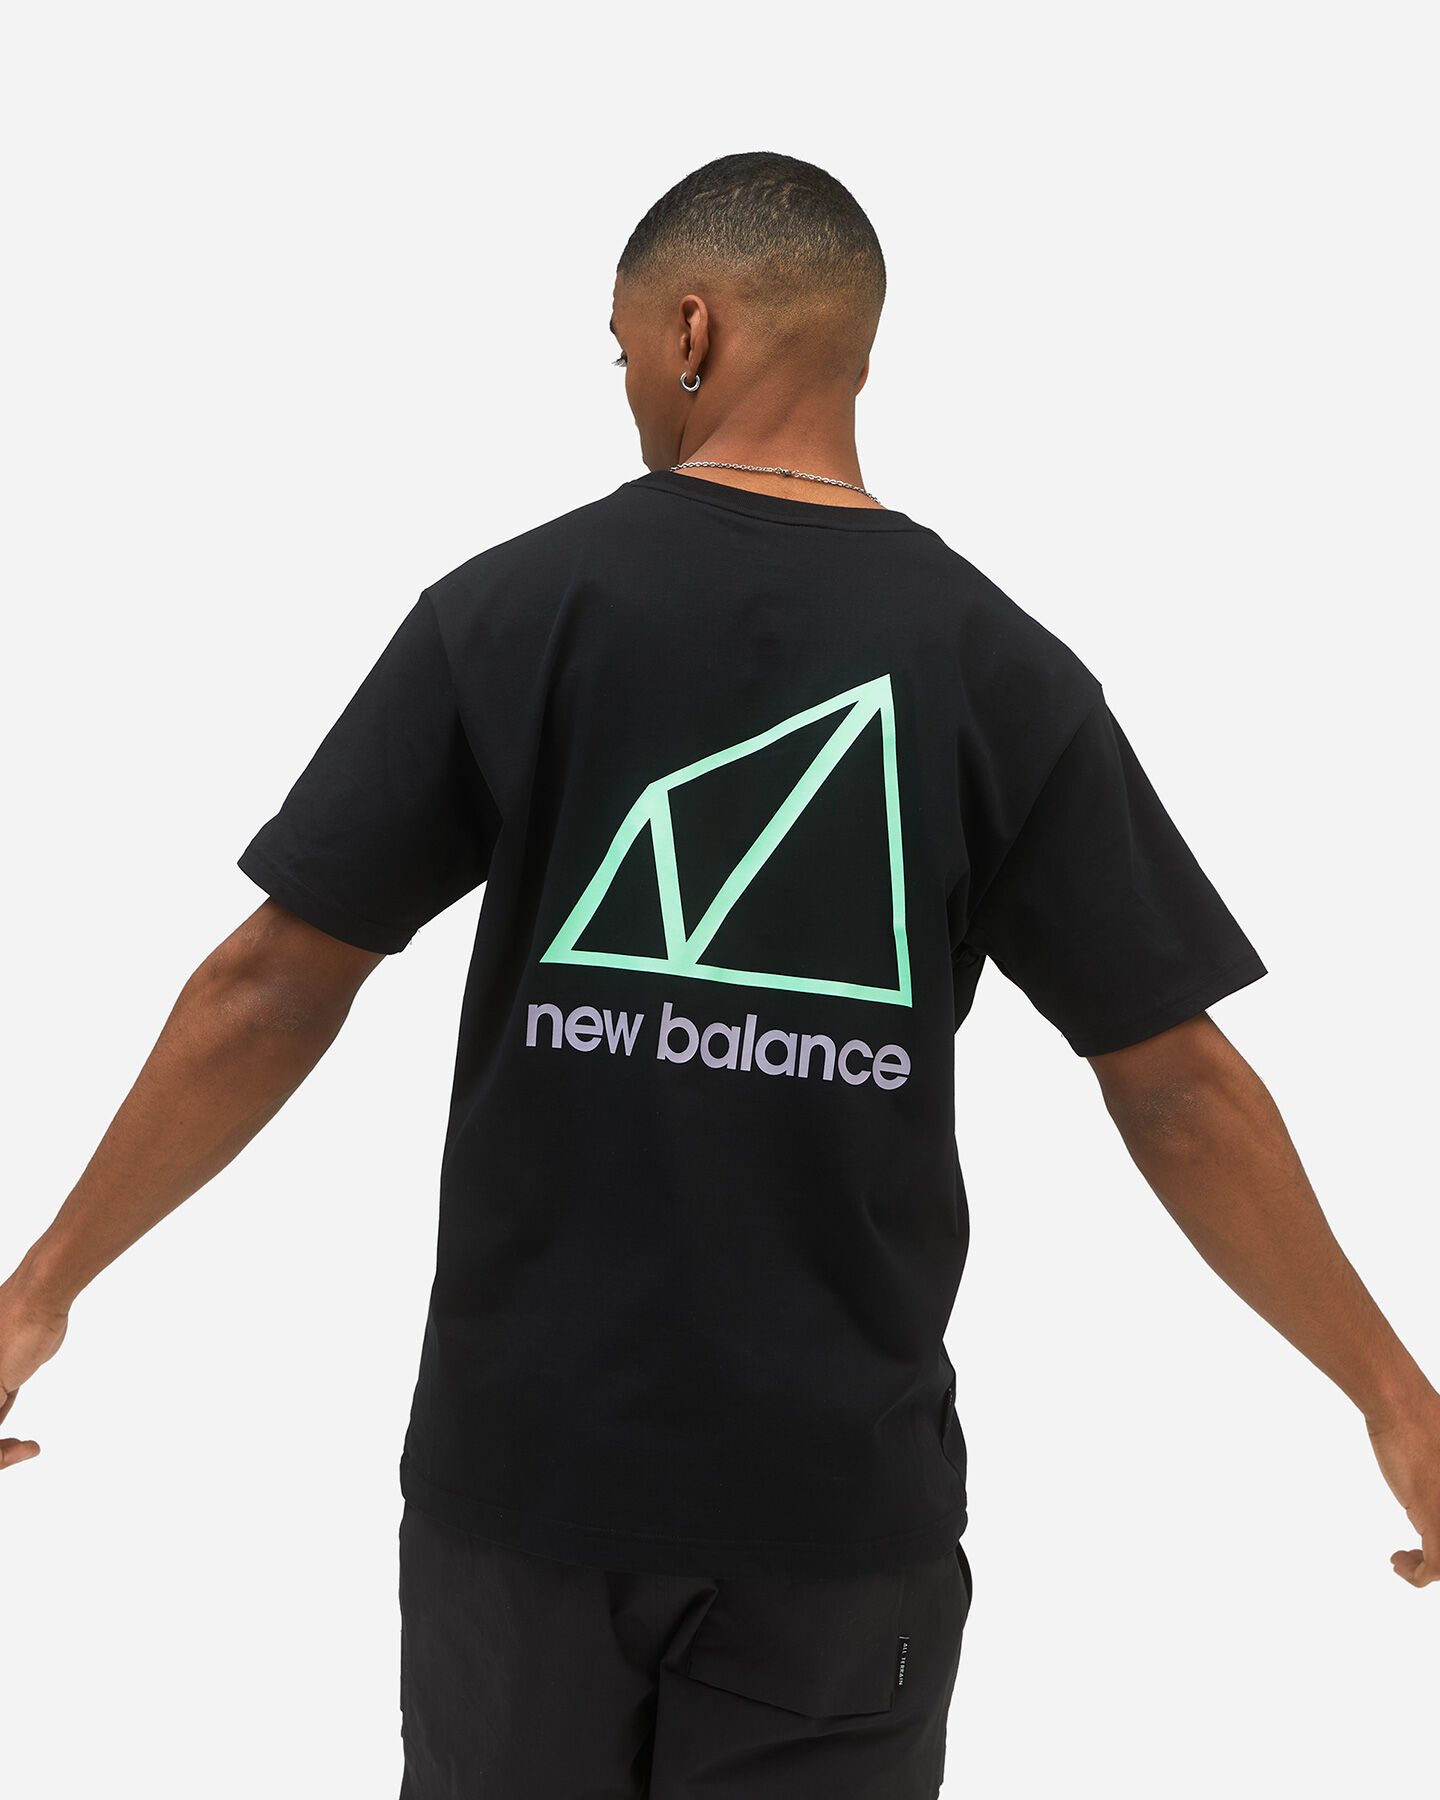  T-Shirt NEW BALANCE ALL TERRAIN M S5335420|-|S* scatto 1